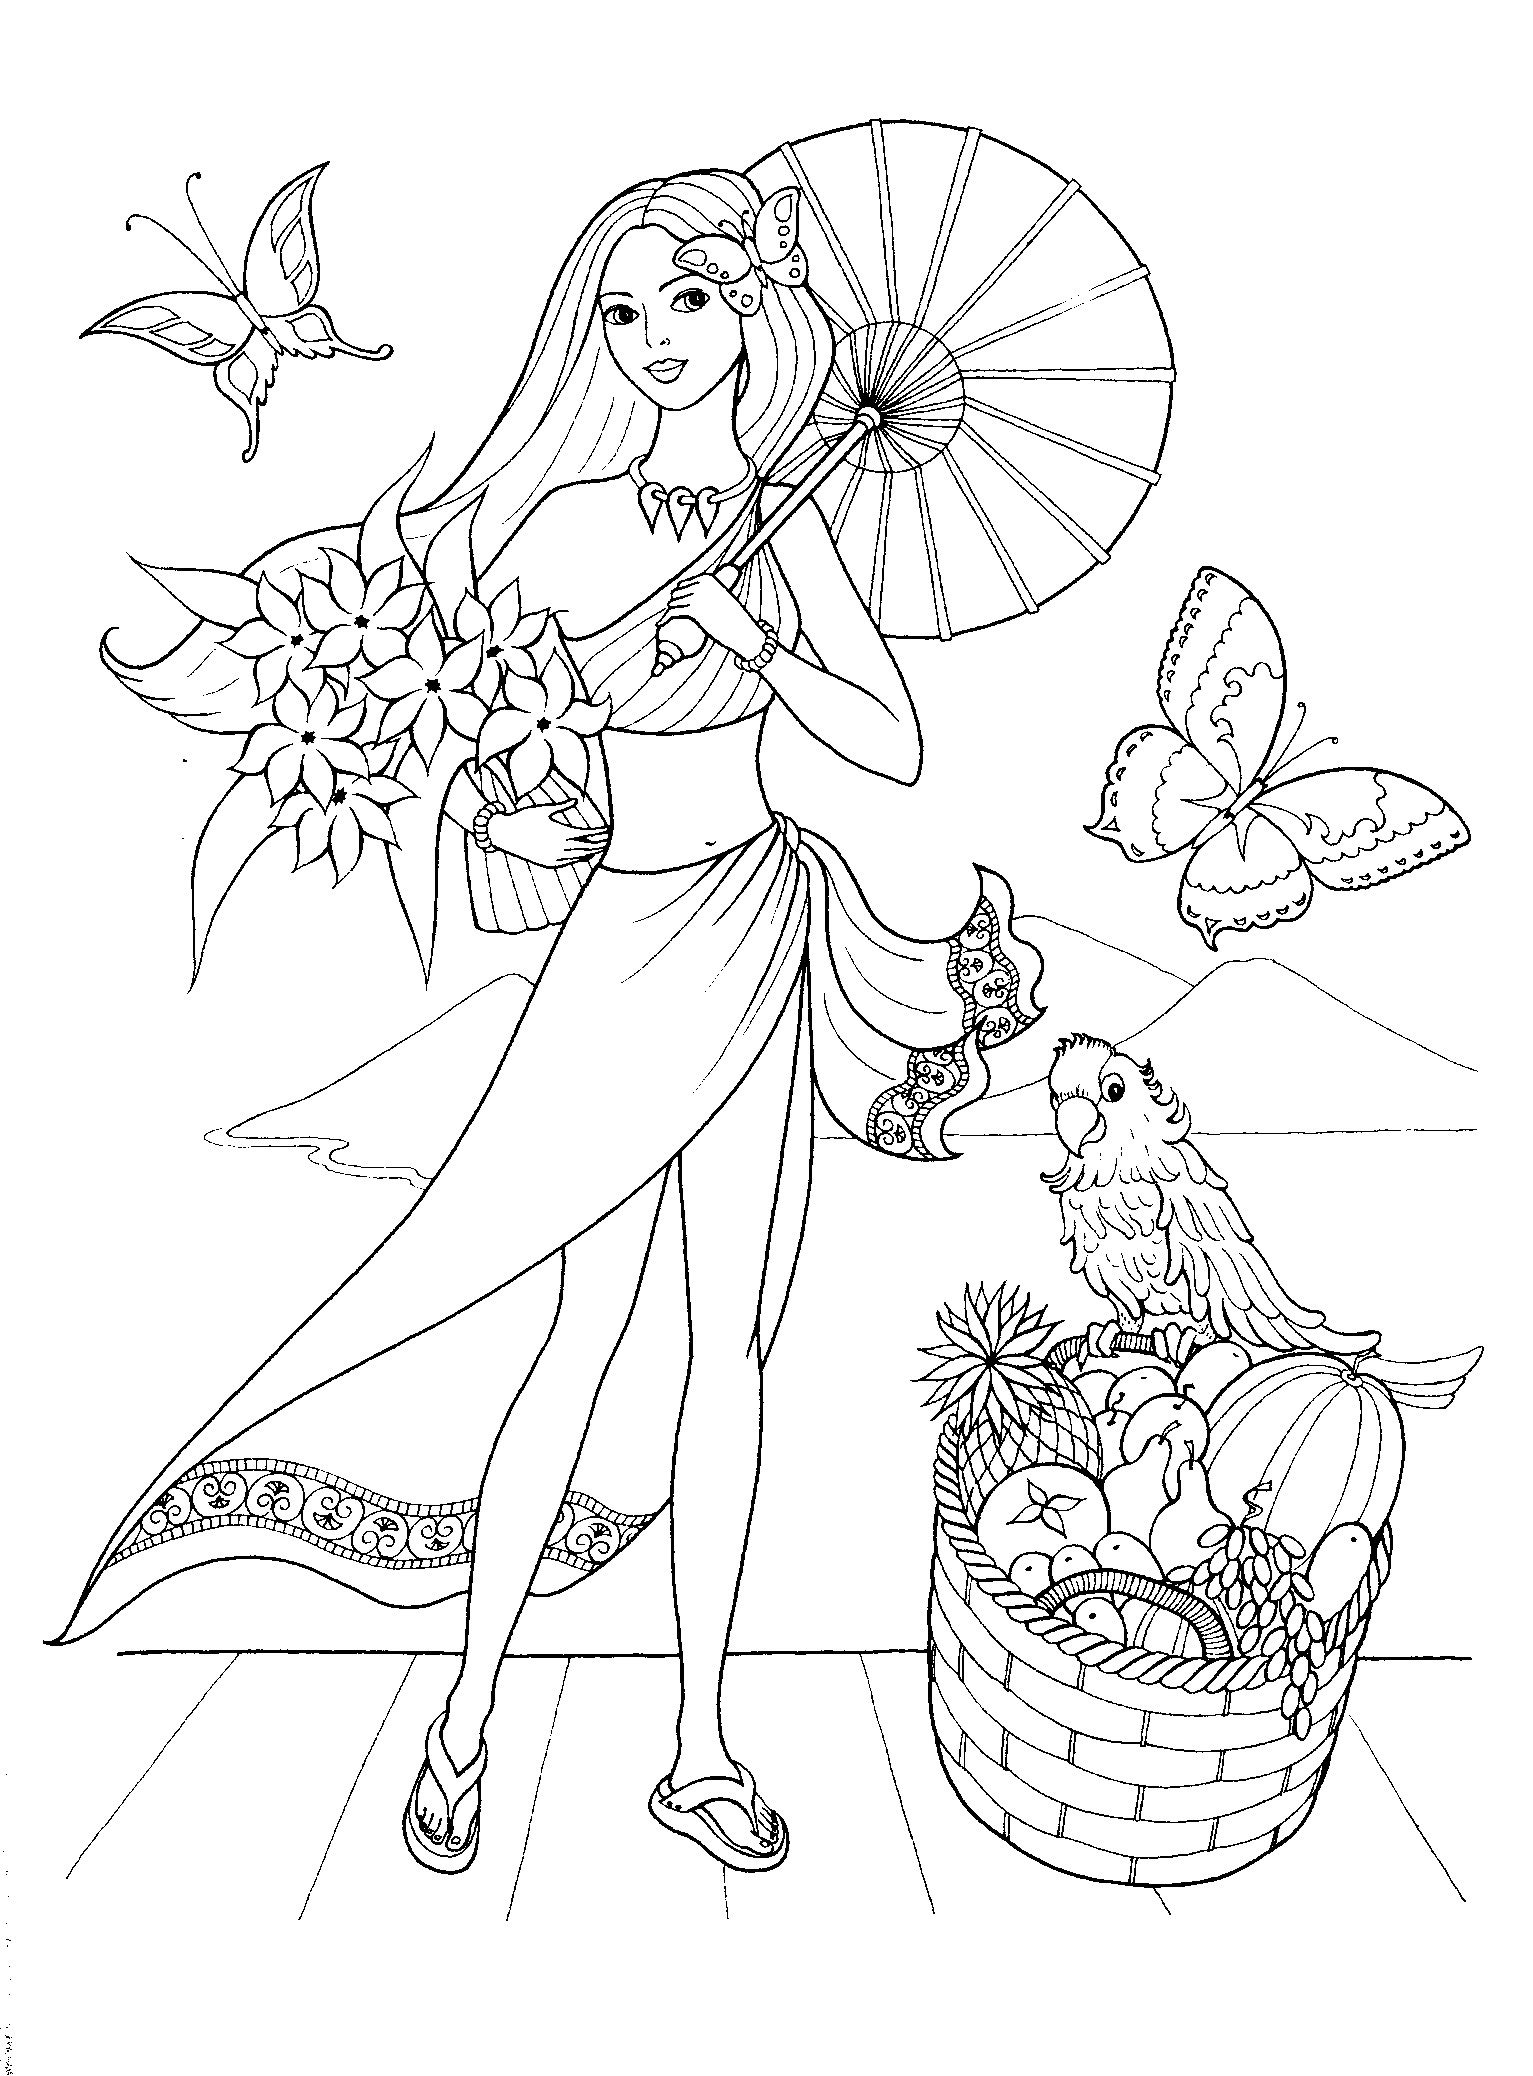 Coloring Pages For Girls Mouted Princess
 Fashionable girls coloring pages 1 1533×2076